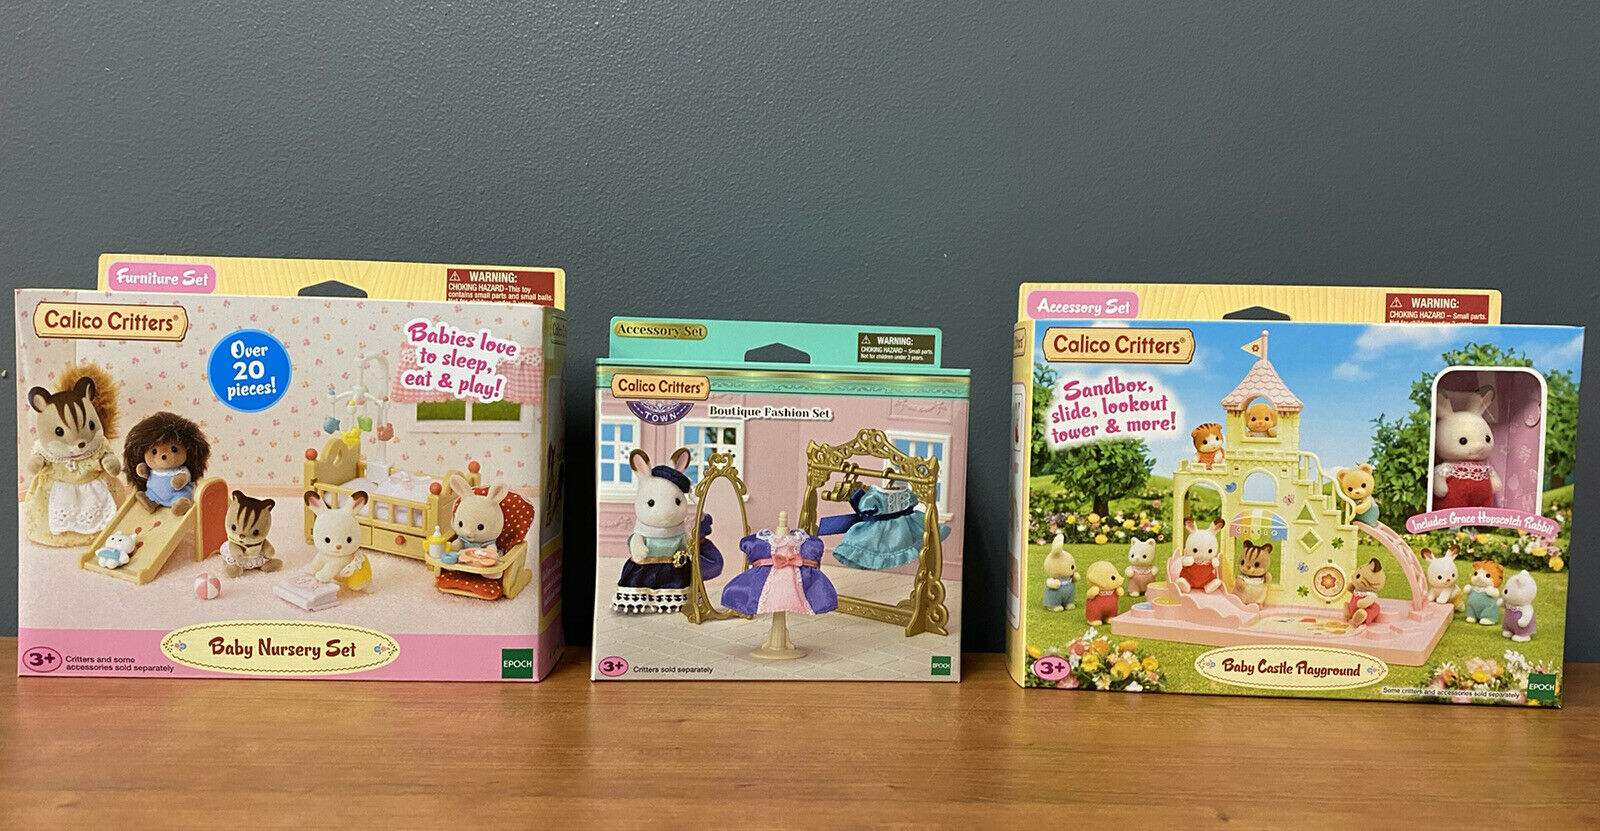 Calico Critters 3 Piece Bundled Lot - Brand New!